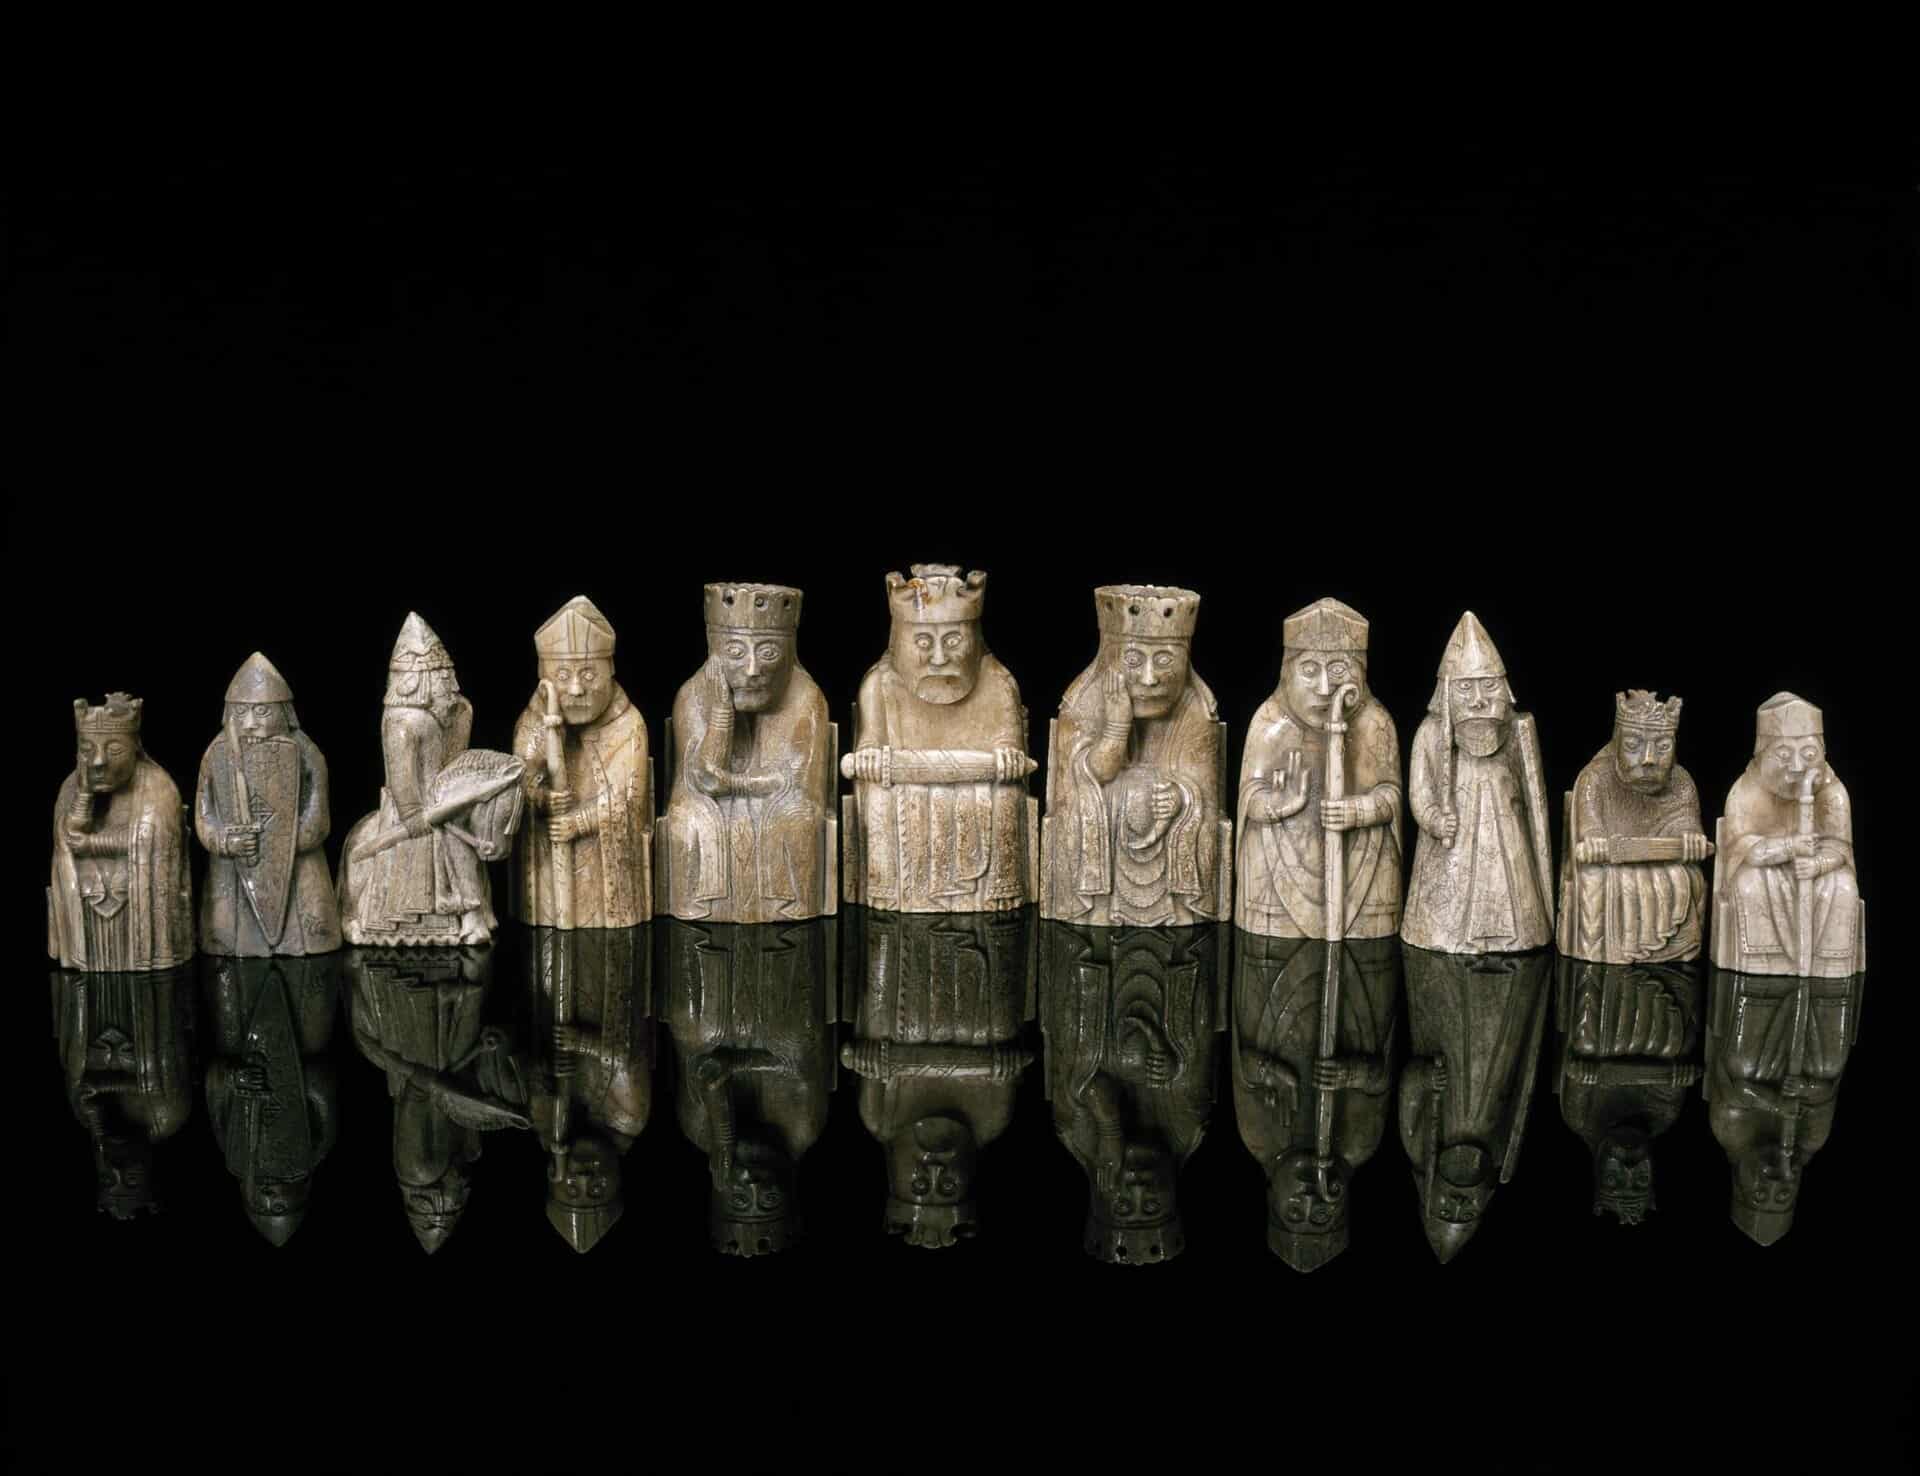 Lewis chess set from the 12th century. Photo: National Museum of Scotland/Wikimedia Commons/ CC BY-SA 4.0